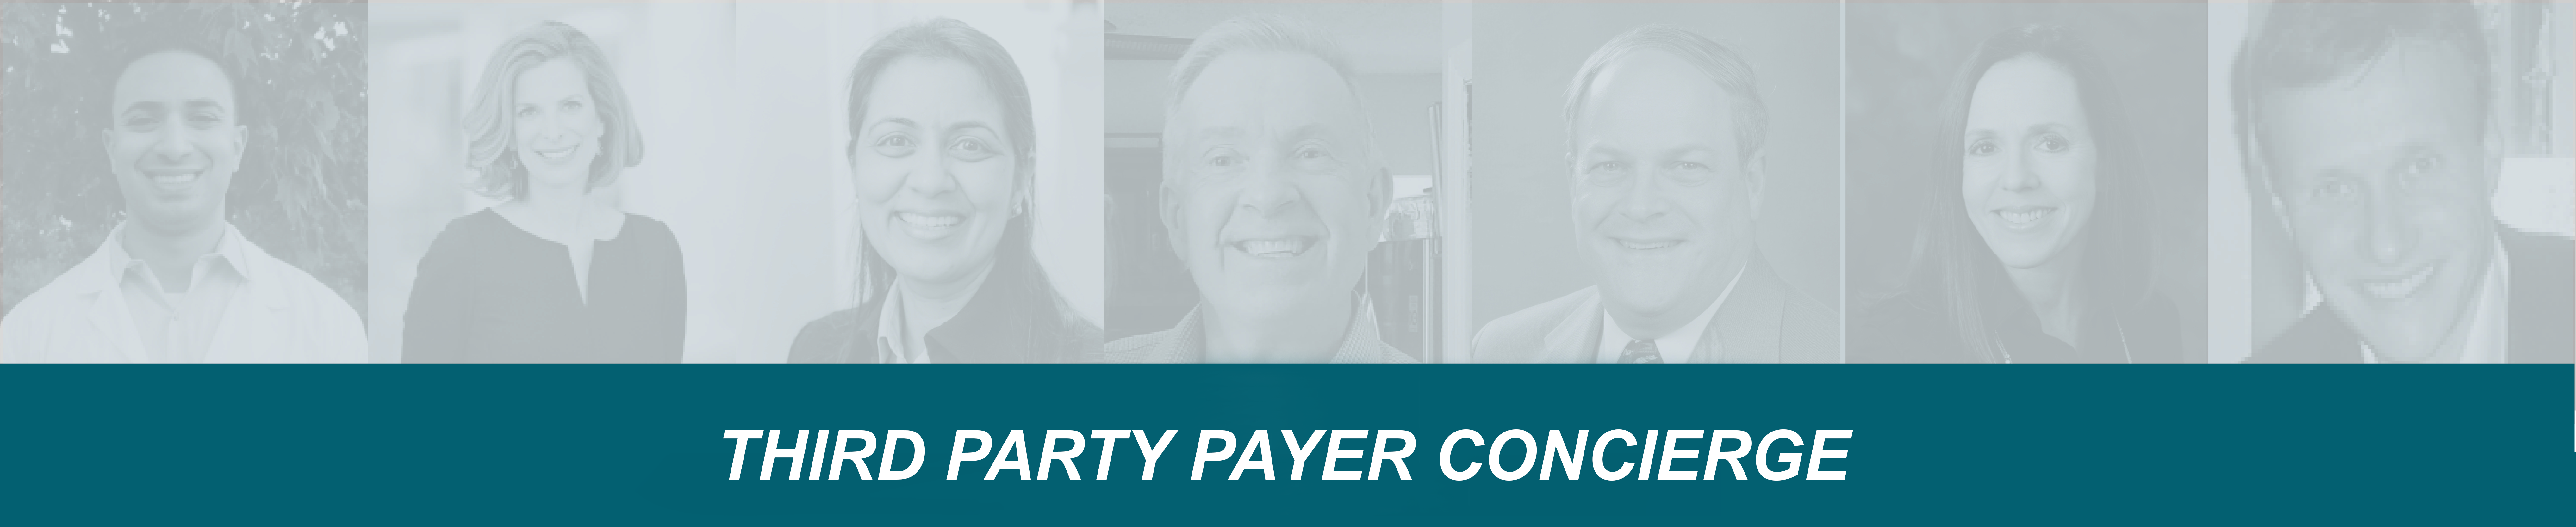 Third party payer concierge banner